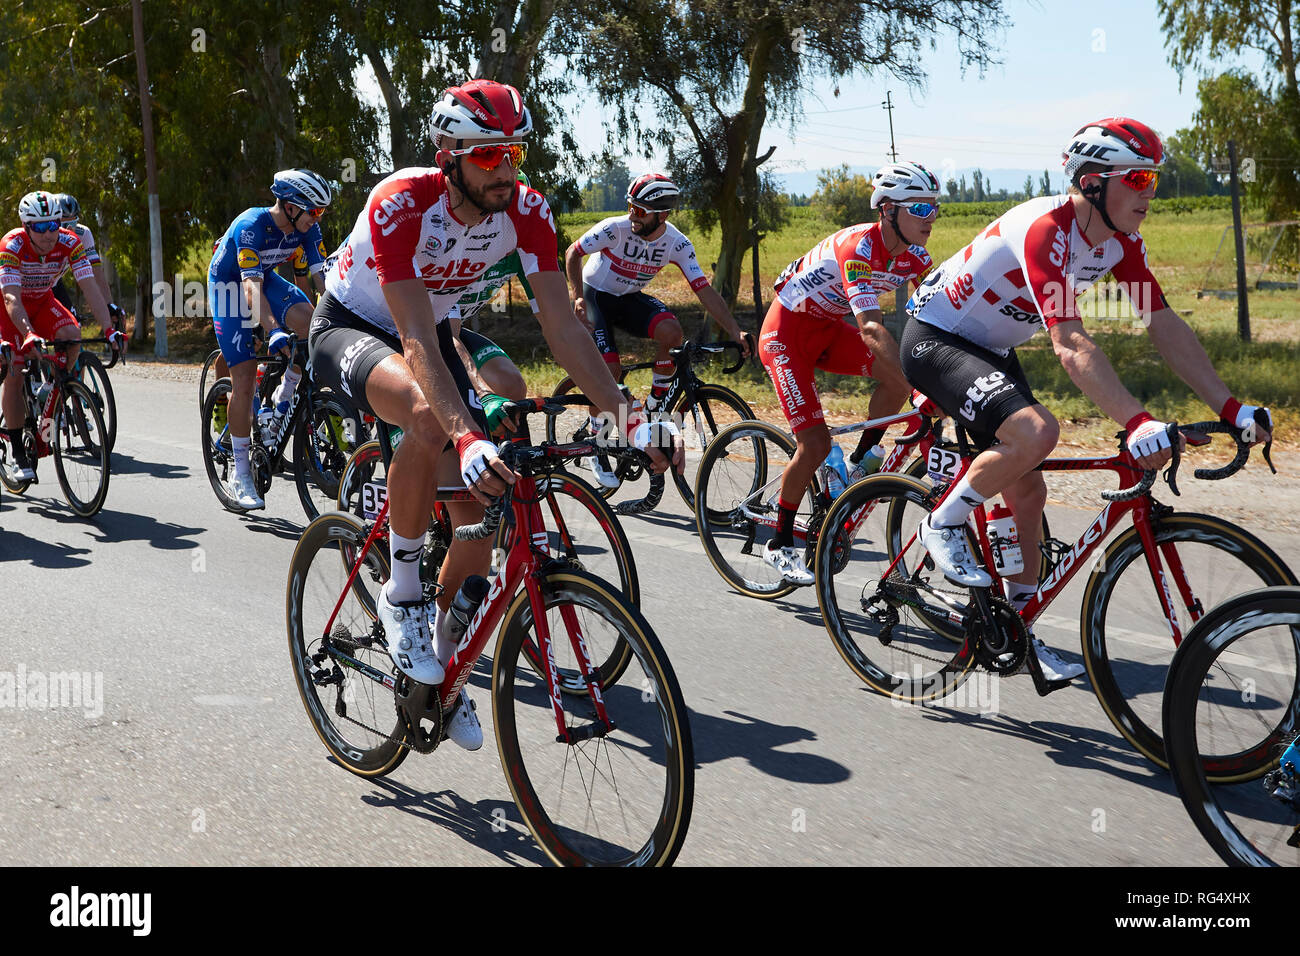 San Juan, Argentina. 27th Jan, 2019. MENDOZA, ARGENTINA - January 27: cyclists of the Lotto Soudal team, during theStage 1, 159.1 km. Difunta Correa in the 37th Vuelta a San Juan 2019 on January 27, 2019 in San Juan, Argentina. Credit: Alexis Lloret/Alamy Live News Stock Photo